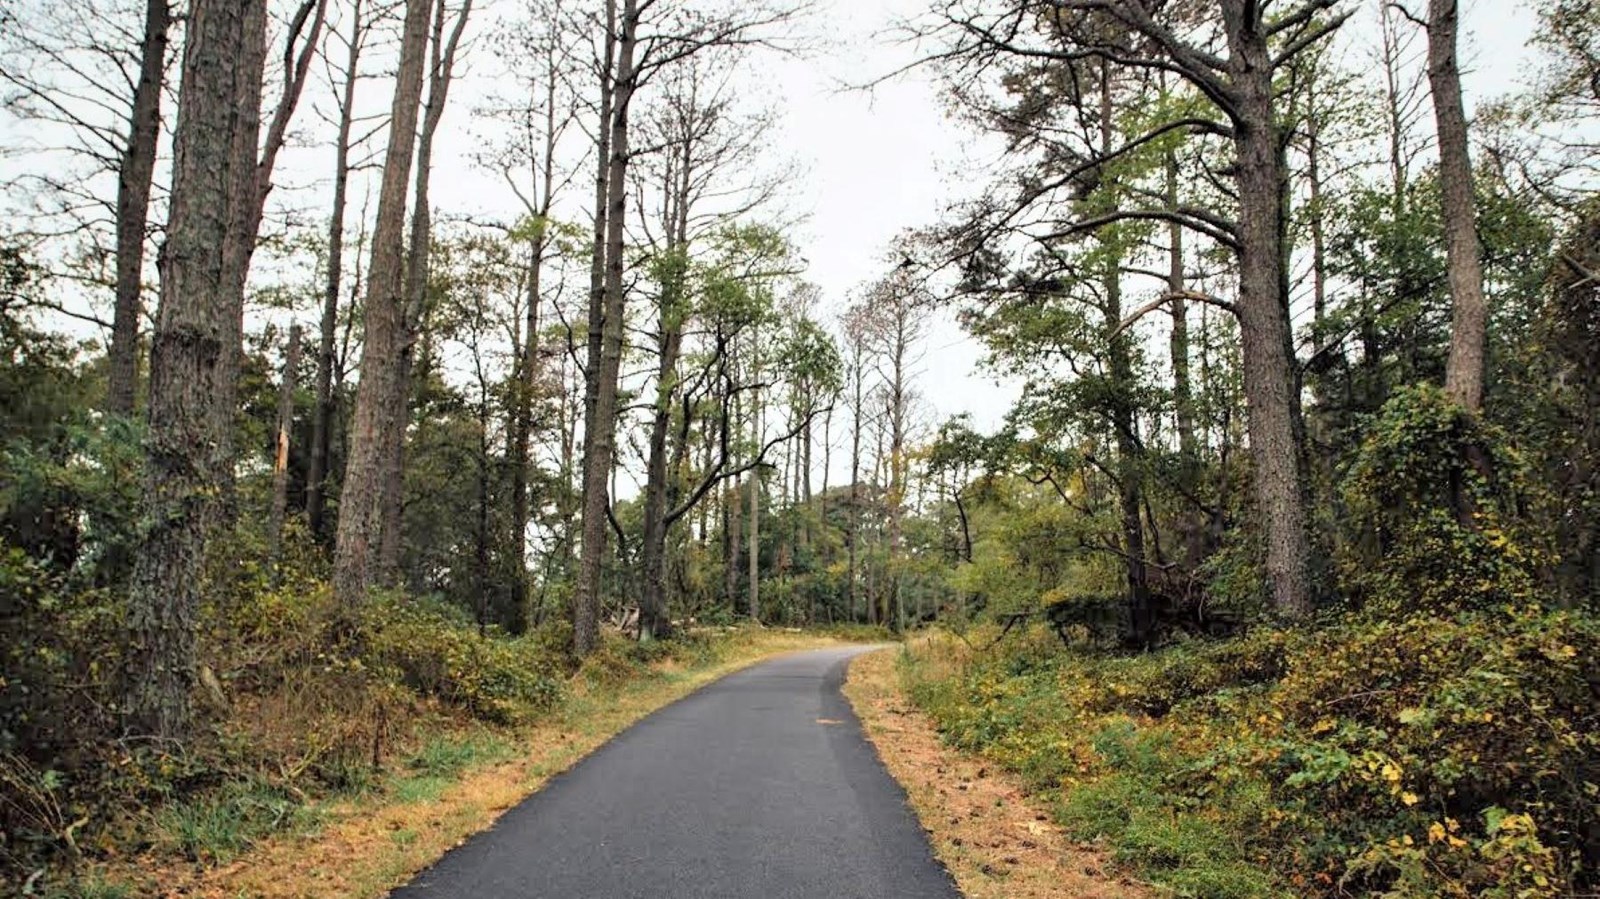 A view of the Woodland trail through the loblolly pine forest